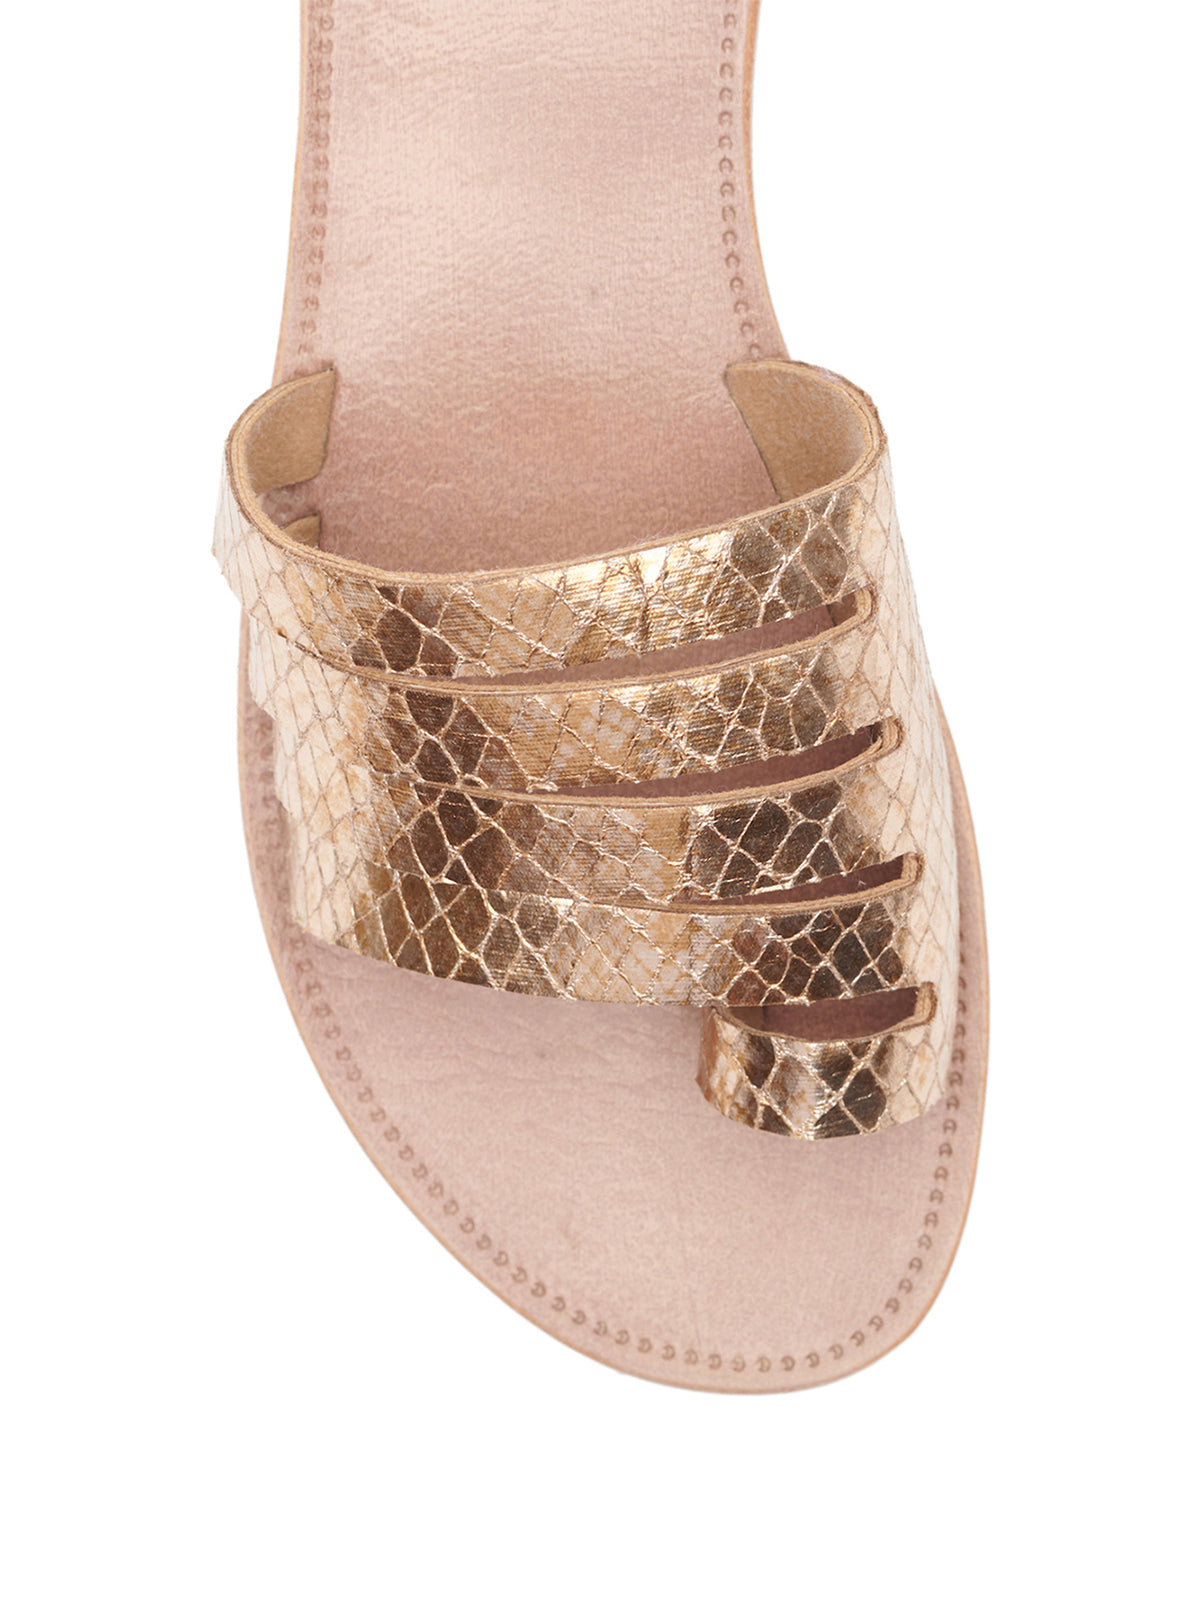 Metallic slightly textured and detailed Toe Ring Slides